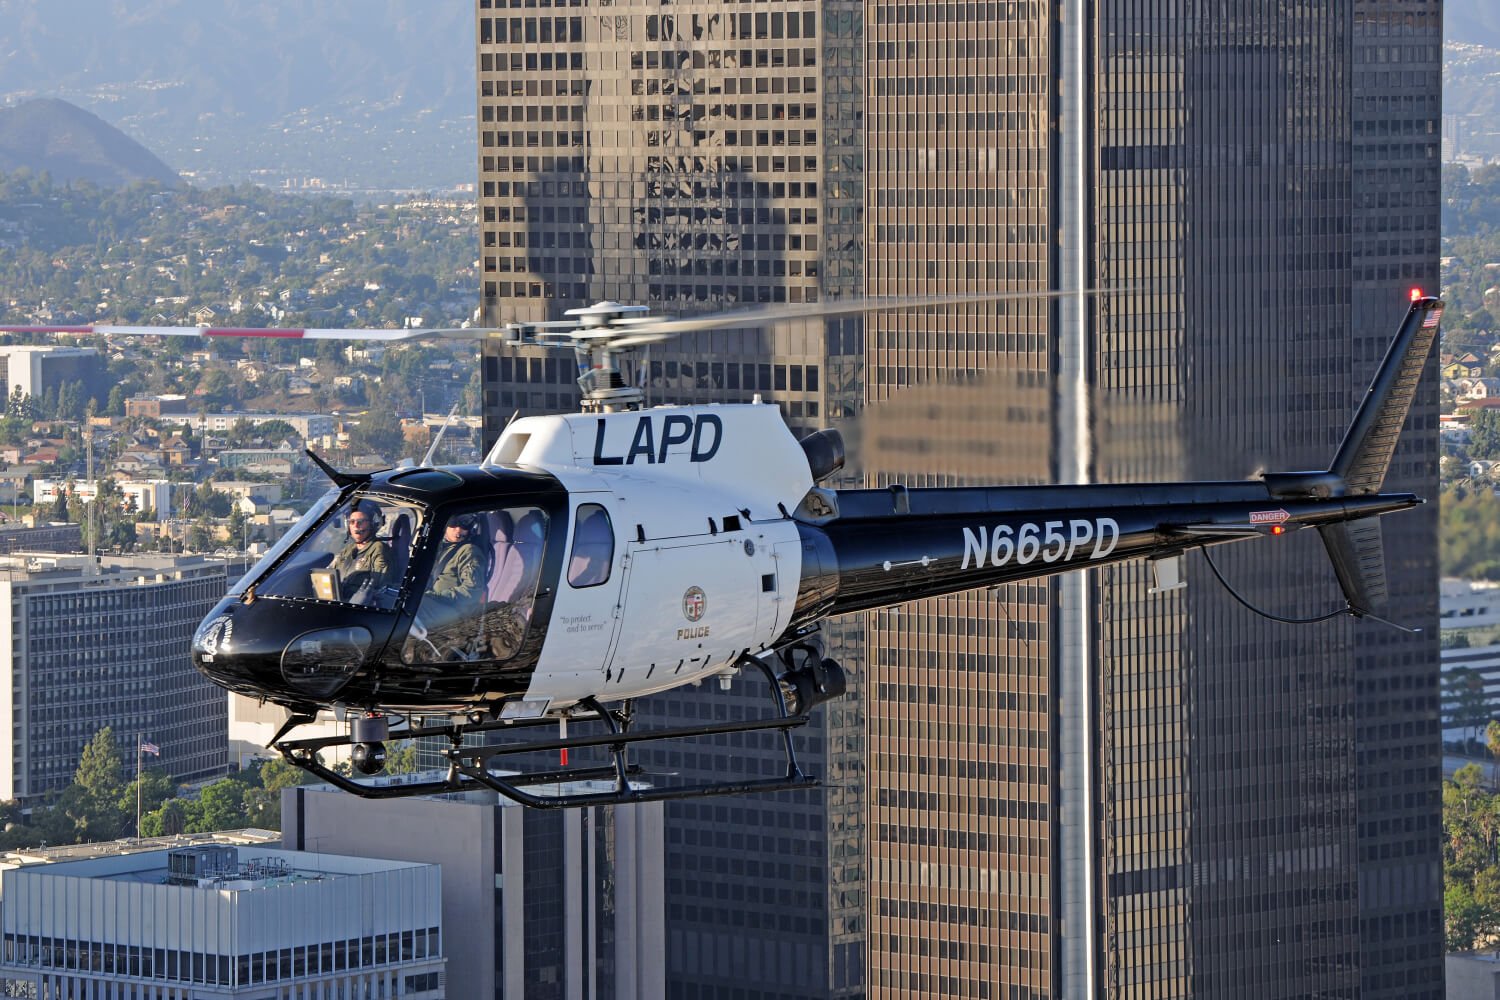 Chief pilot defends LAPD helicopter unit as a ‘force multiplier’